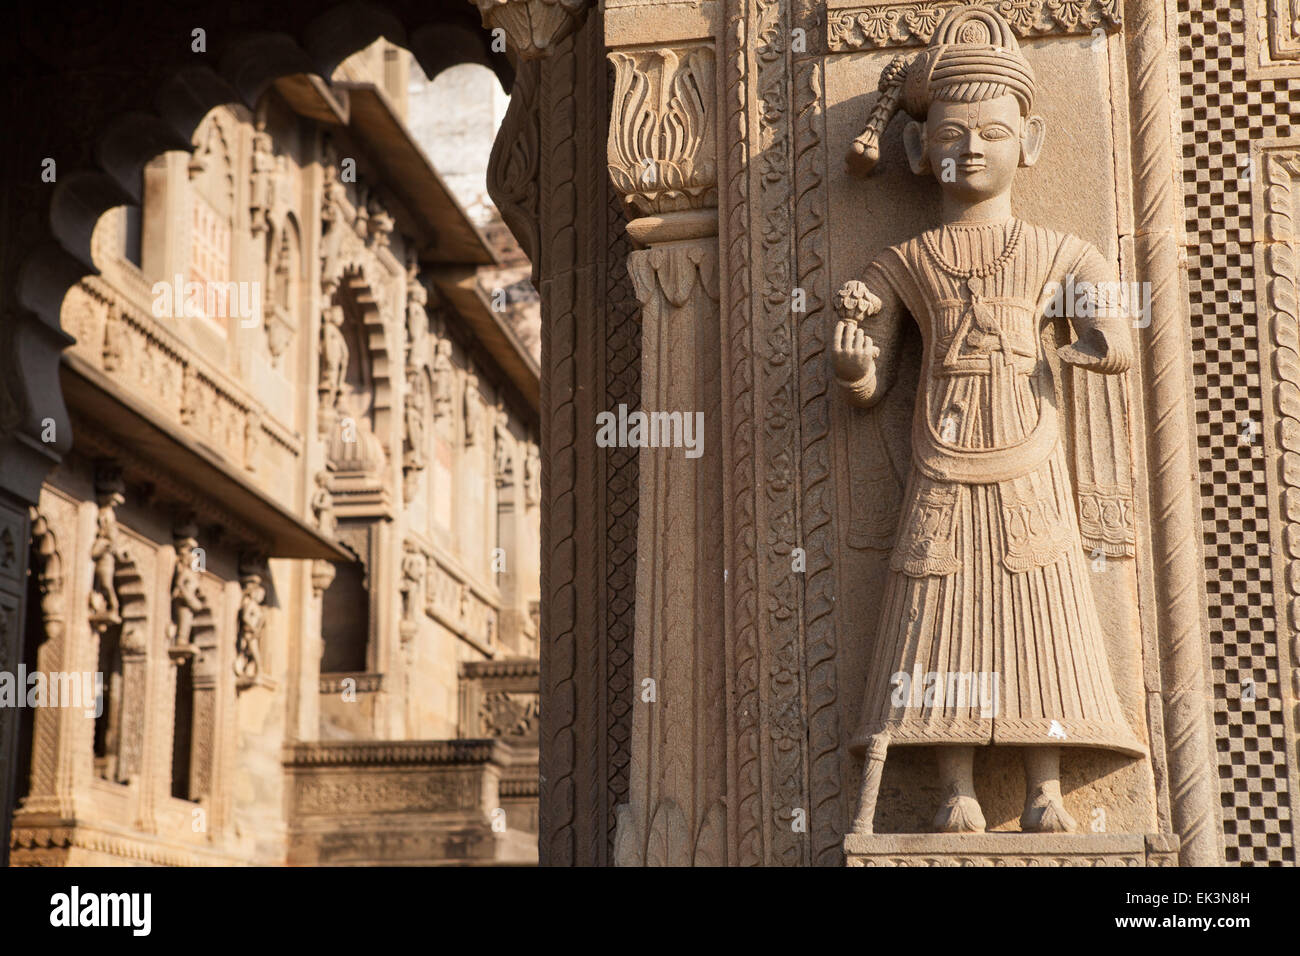 Carving on the entrance to Ahilya Fort in Maheshwar Stock Photo